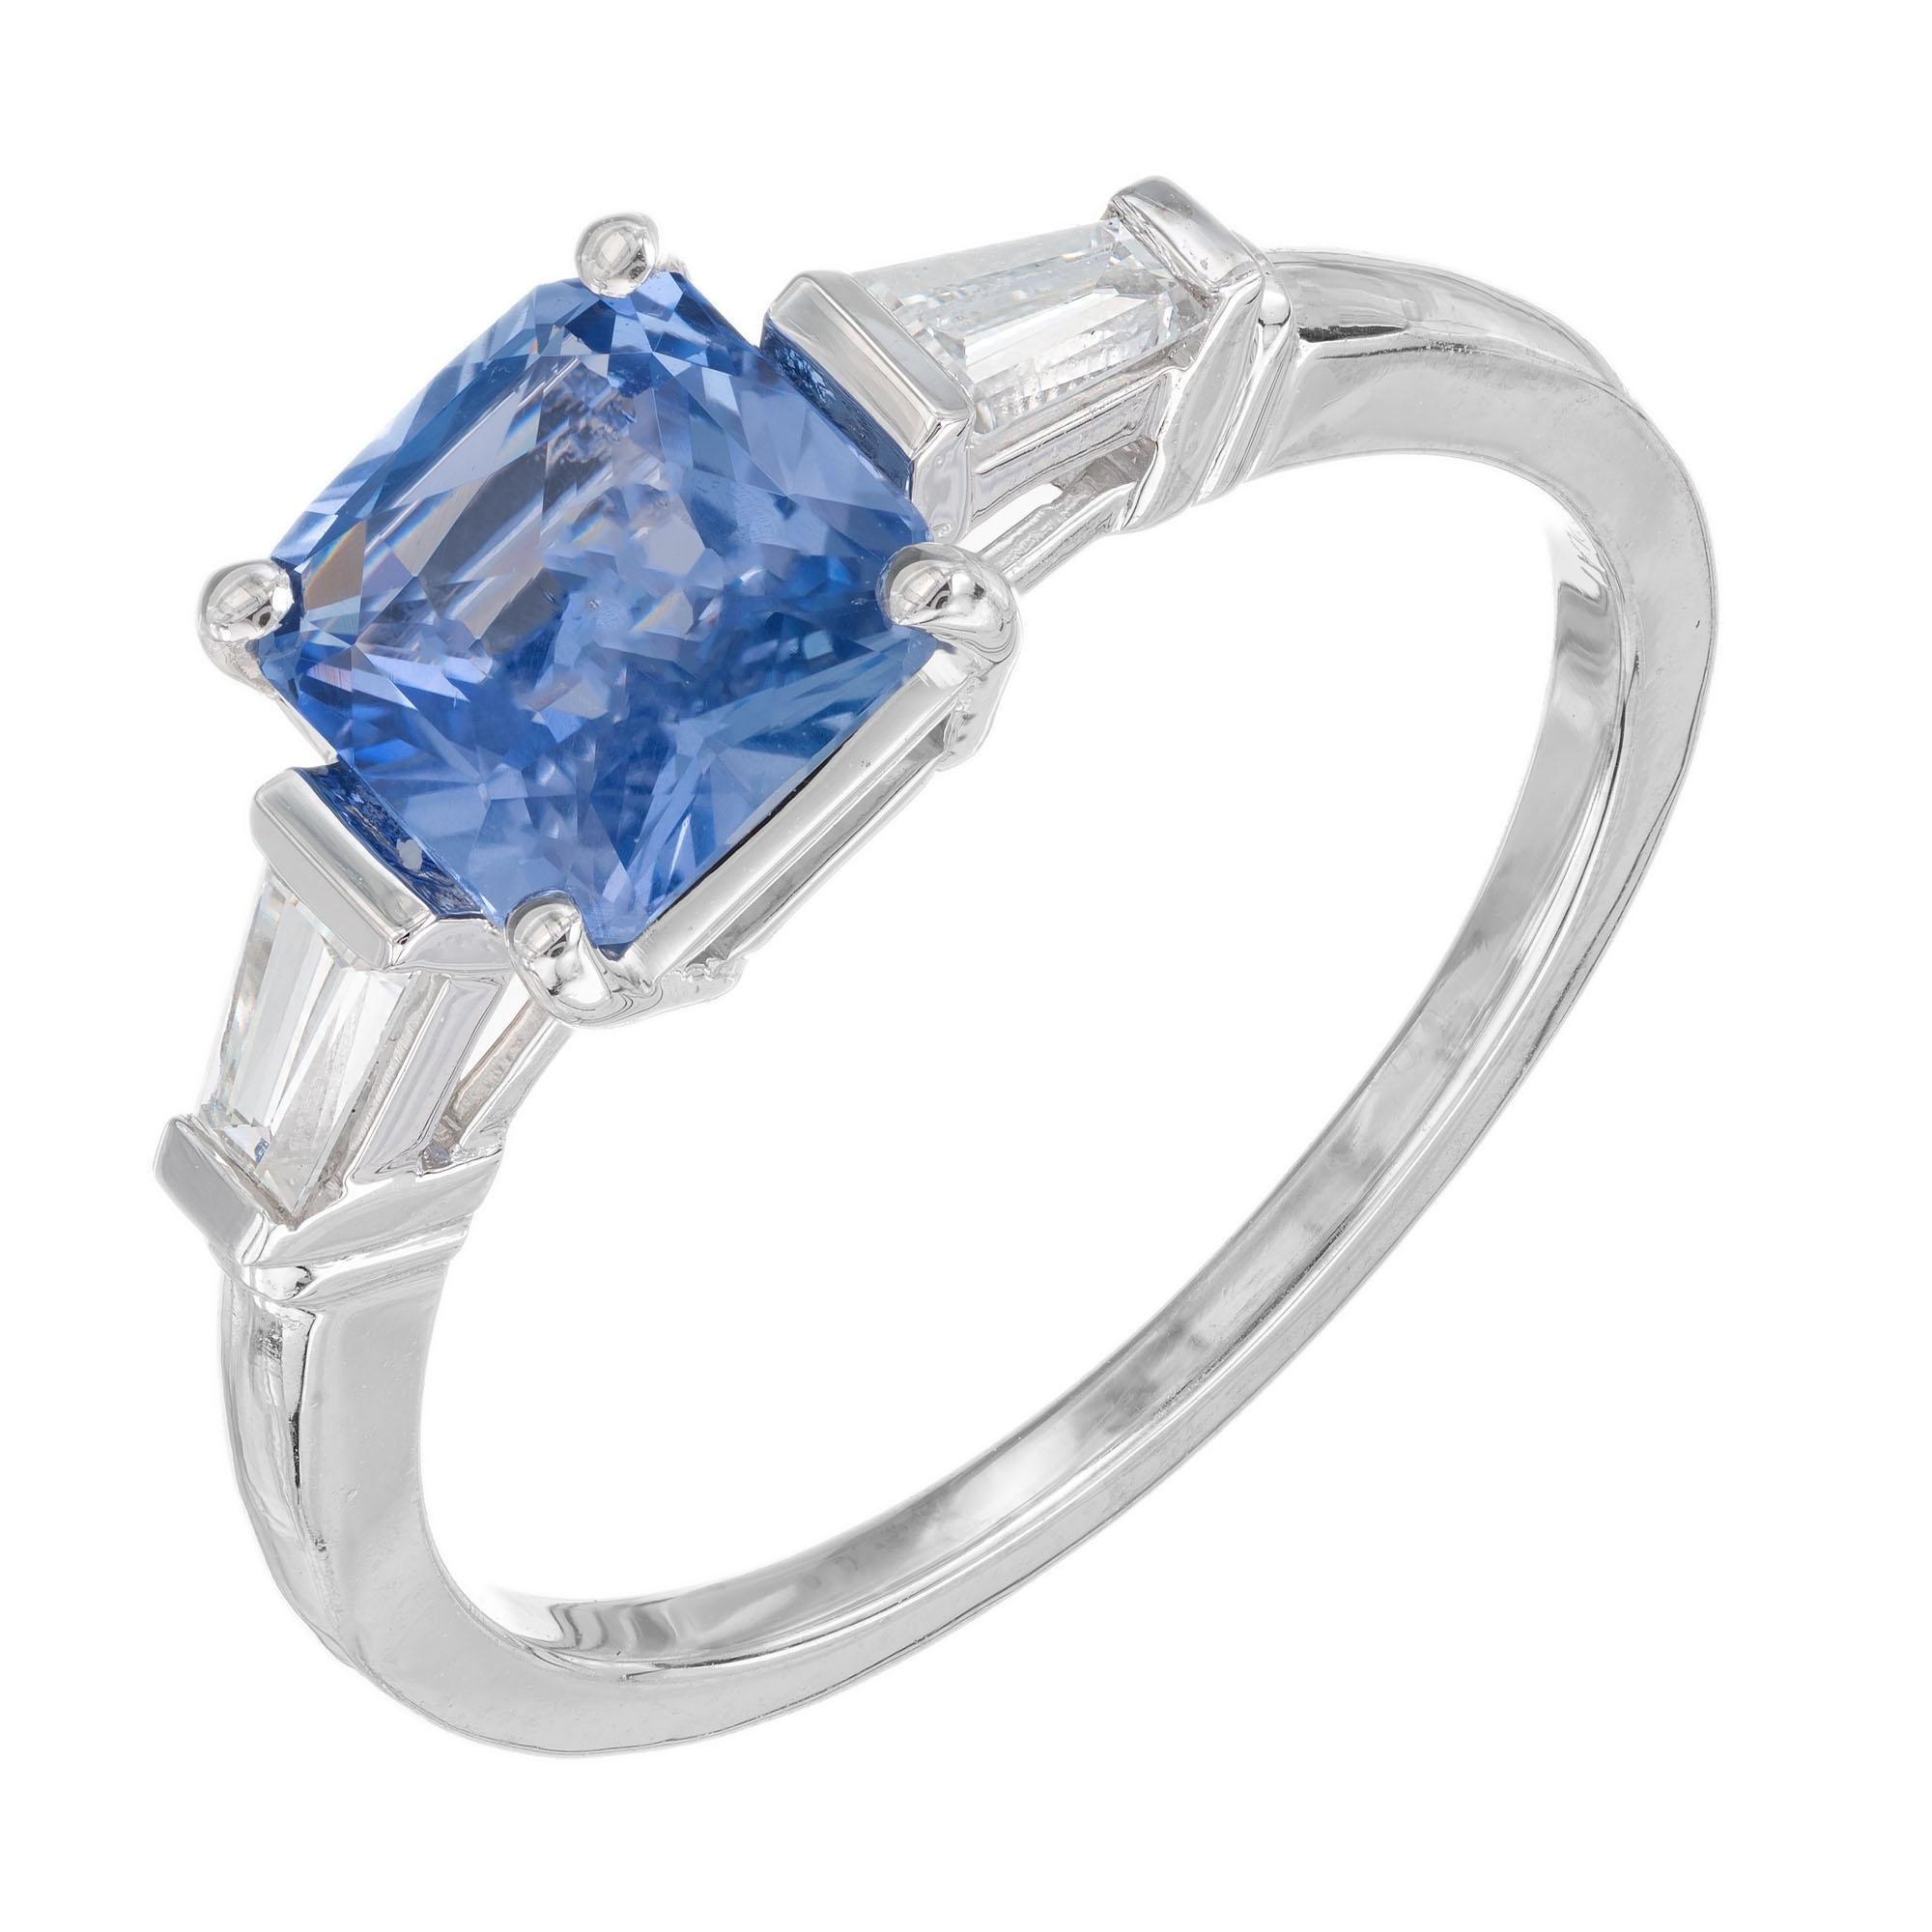 Periwinkle blue Art Deco octagonal step cut 1.55 carat sapphire and diamond engagement setting. The GIA certified center stone is from a 1915 estate. Natural no heat or enhancements. Platinum three-stone setting with two tapered baguette side